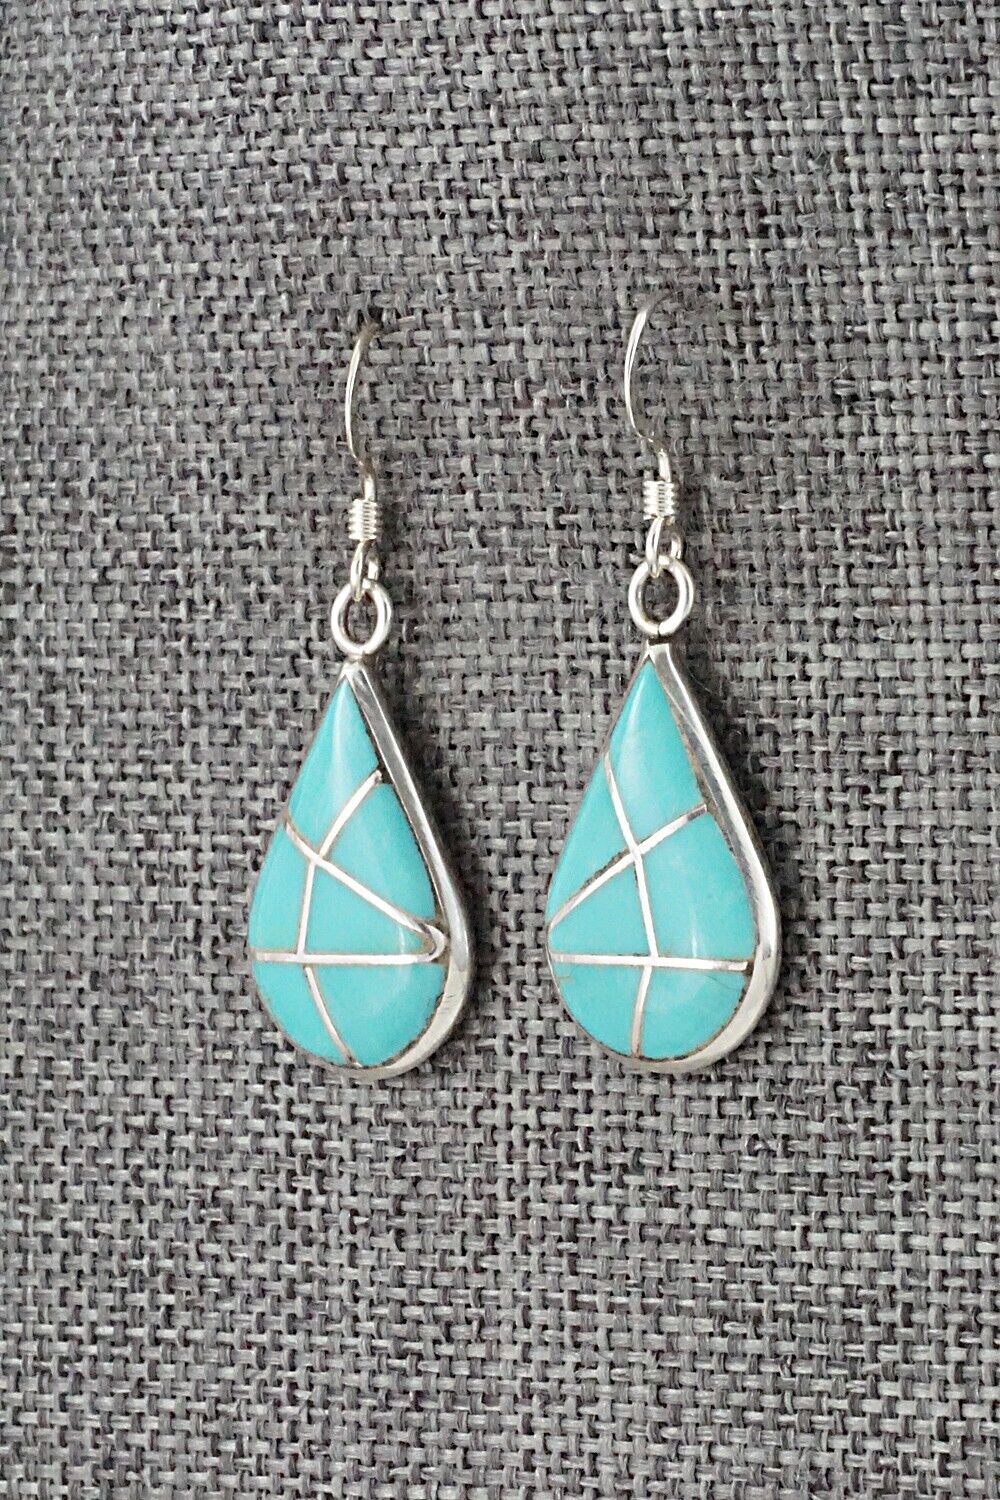 Turquoise & Sterling Silver Inlay Earrings - Laurie Kallestewa